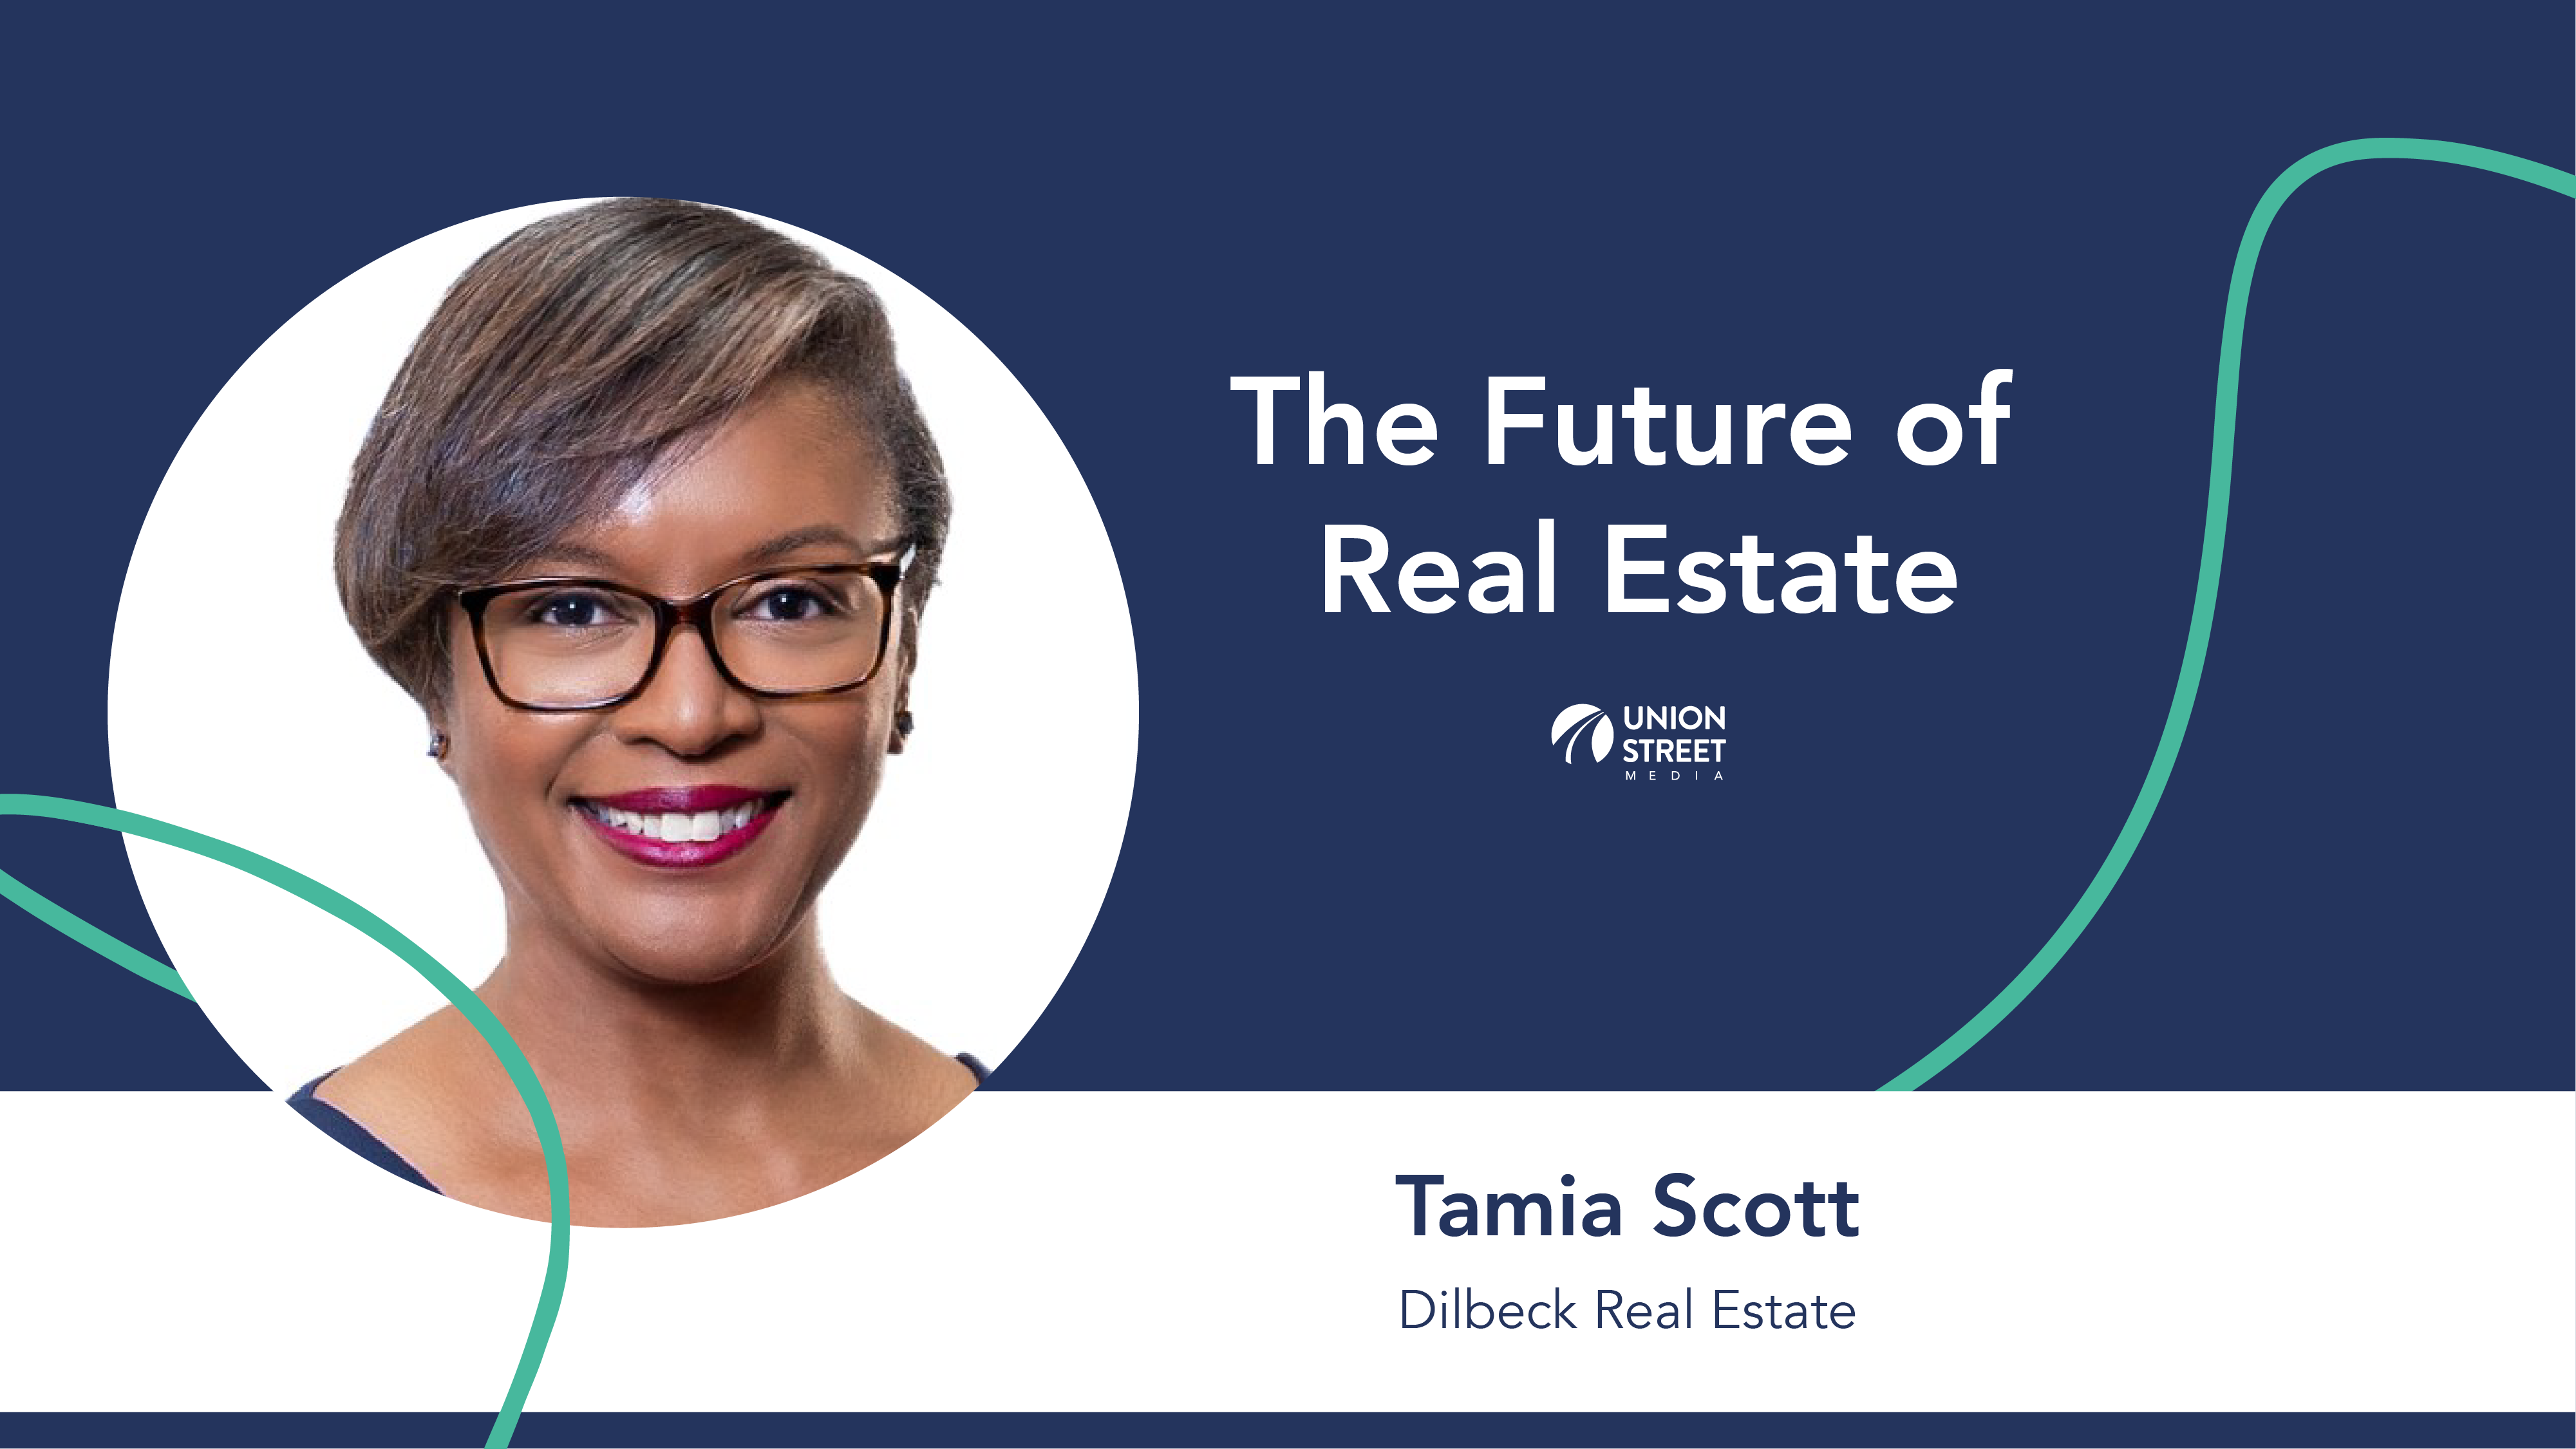 the future of real estate with tamia scott and union street media